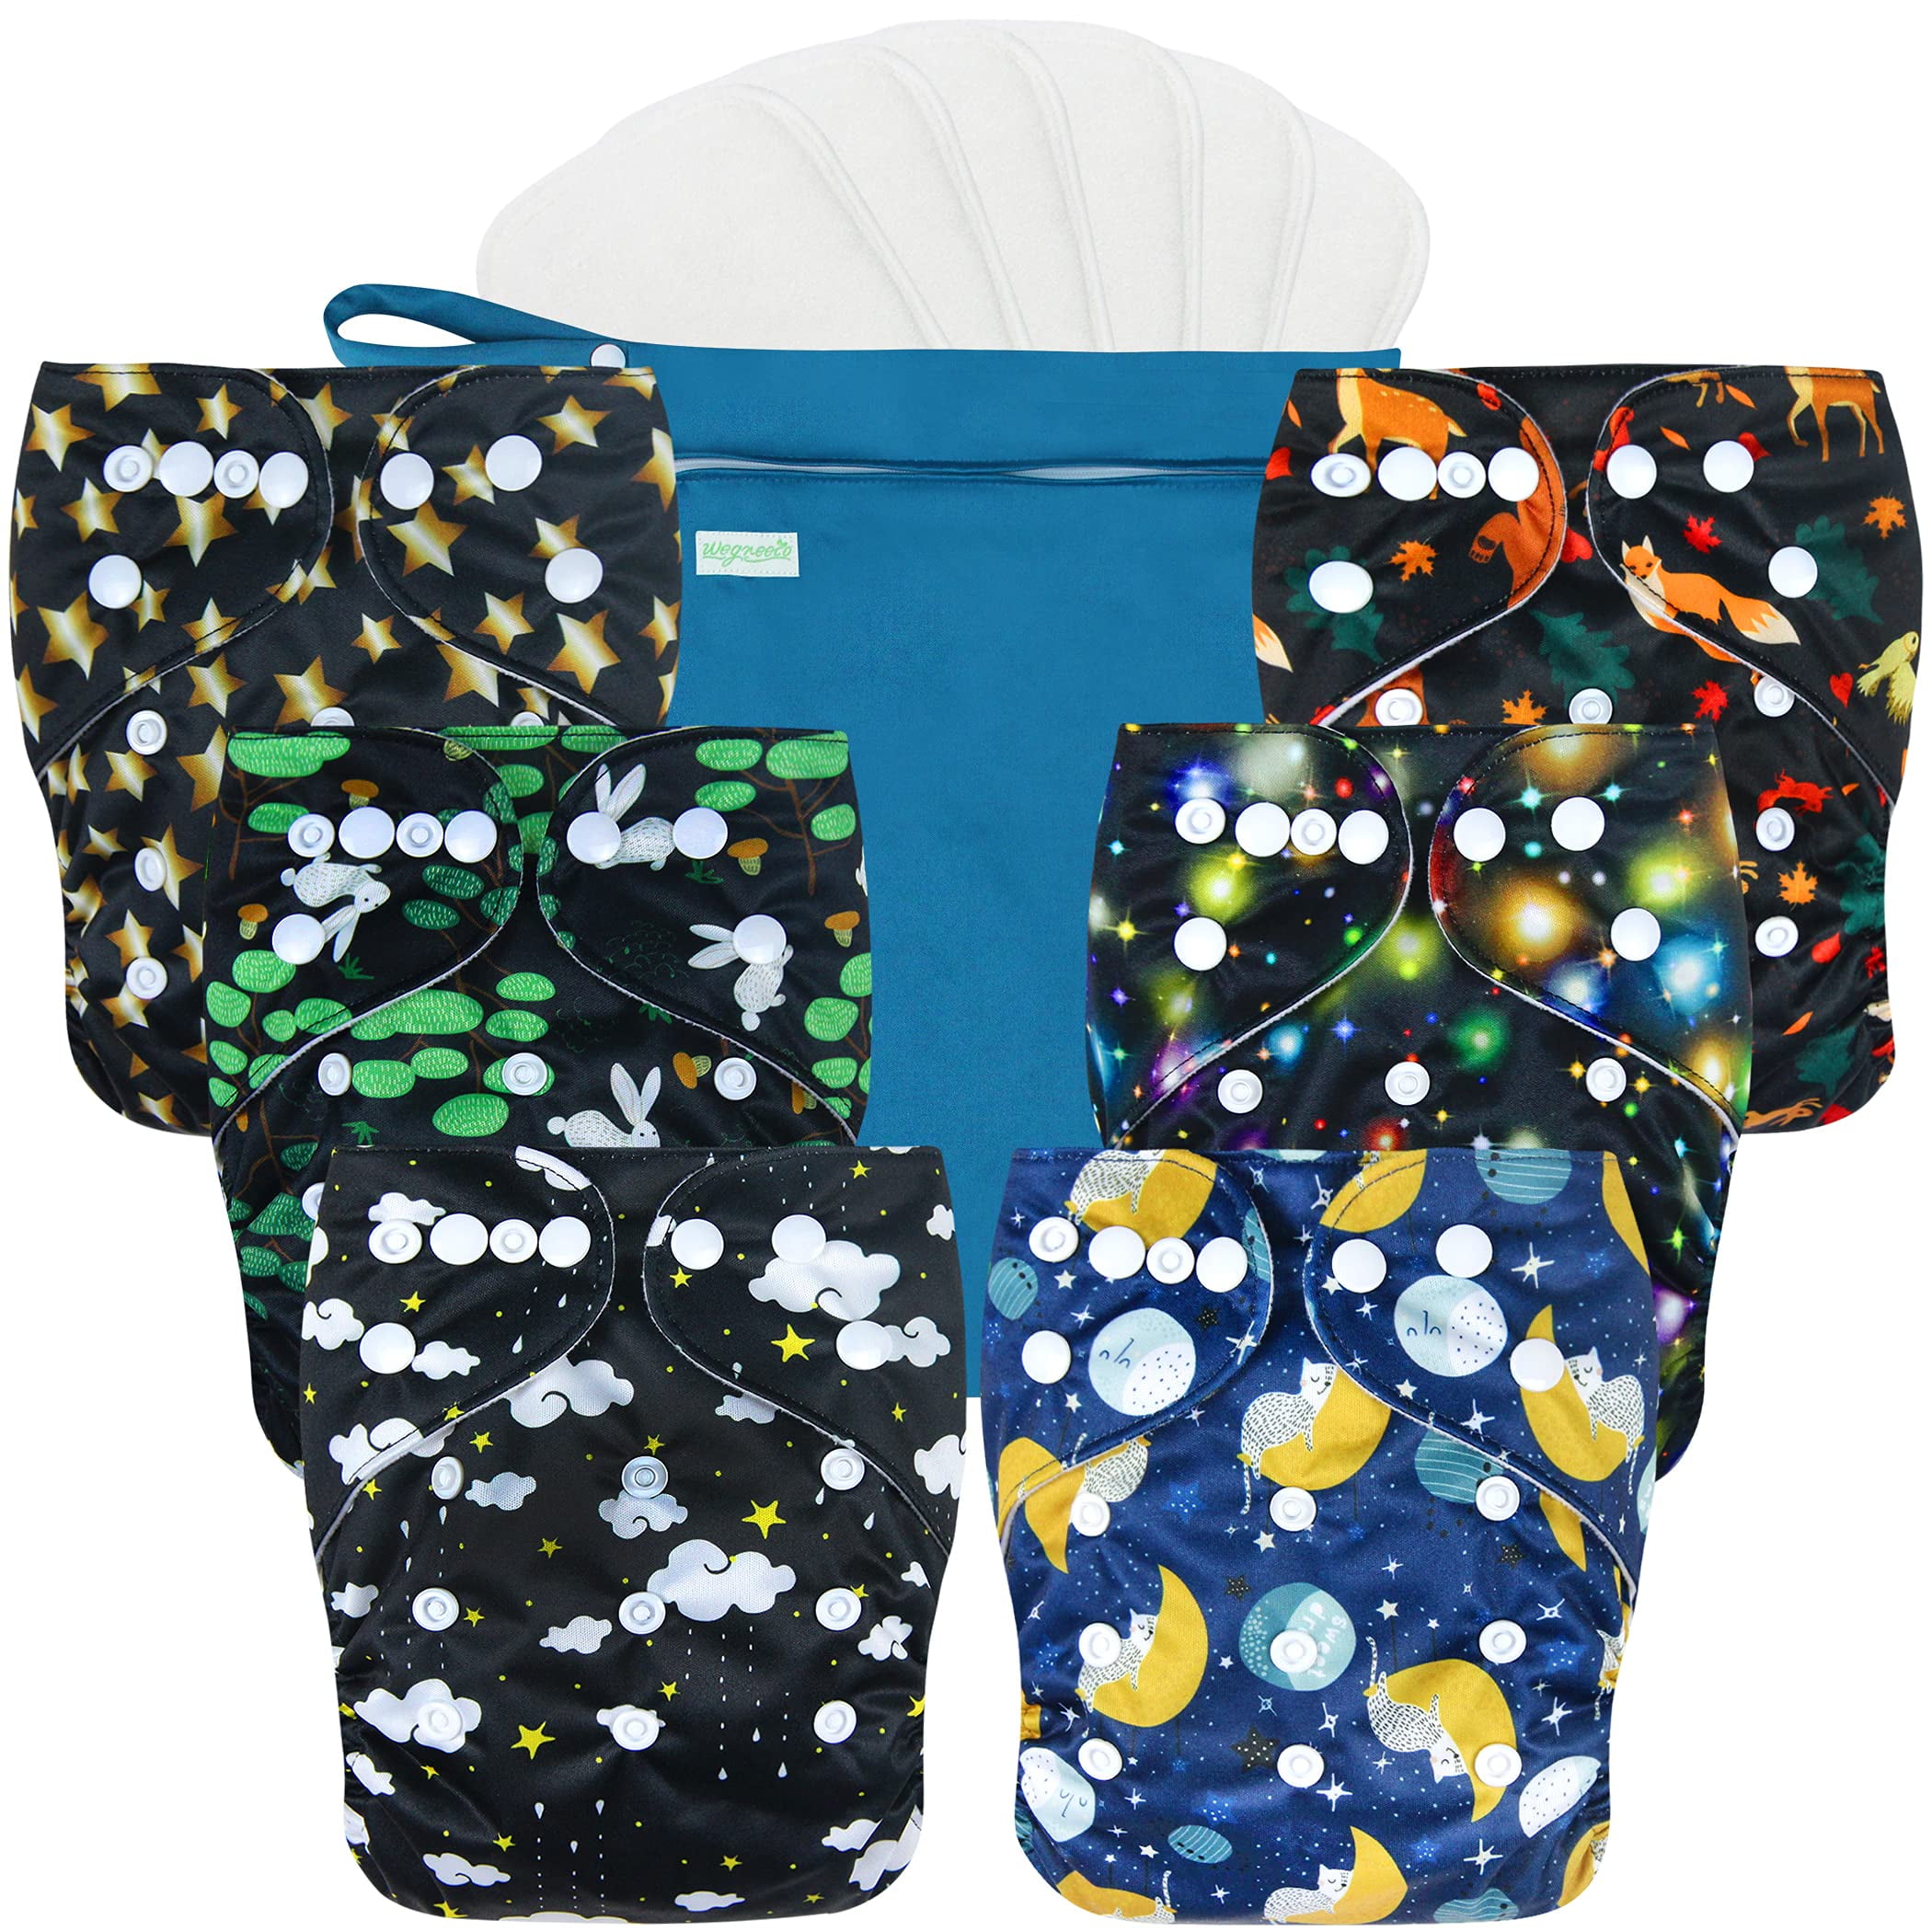 Wegreeco Washable Reusable Baby Cloth Pocket Diapers 6 Pack 6 Inserts 1 Wet Bag 